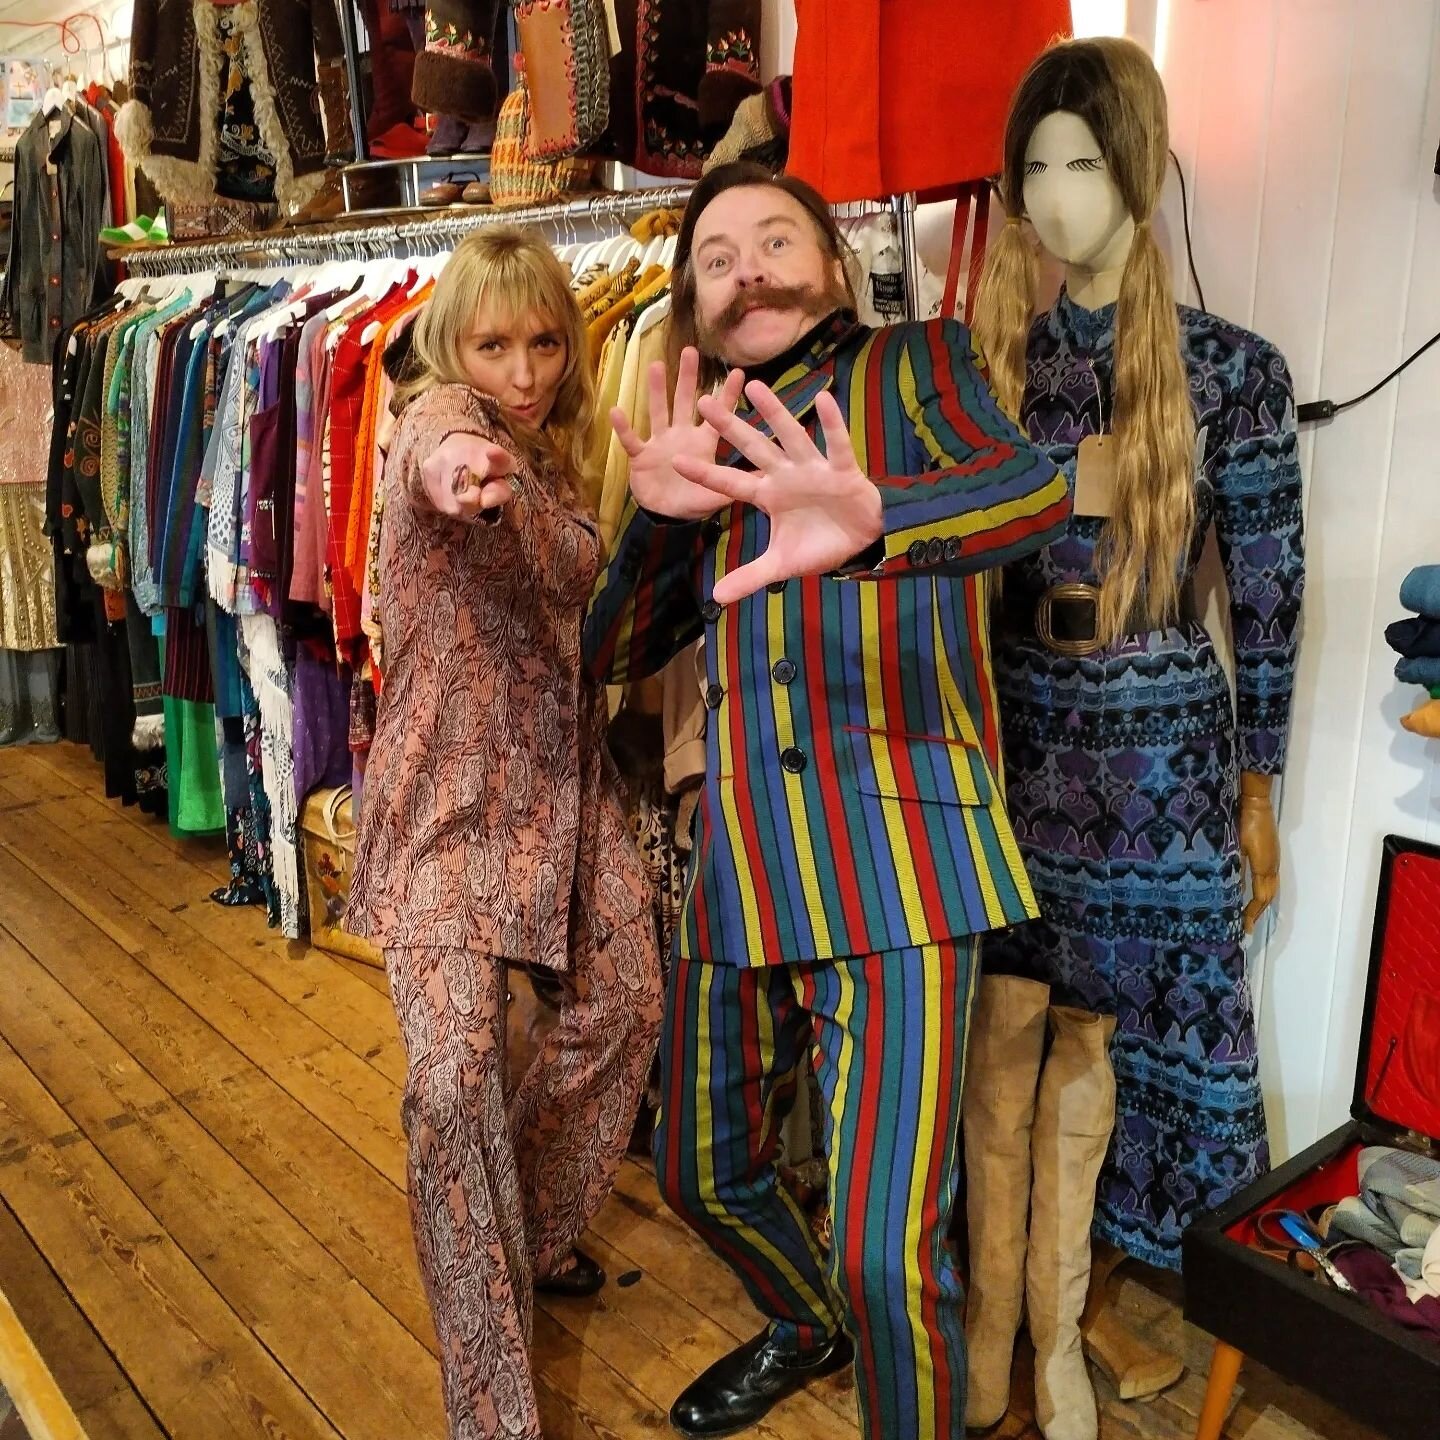 Our gorge gal @hazydayz_vintage
And the lovely Atters from downstairs
🤩🤩🤩🤩🤩🤩🤩

If you wanna find outfits like these we stock the Raddest Baddest Two Pieces, 20s to 90s menswear and womenswear @snoopers.attic

Hop on up the sexy stairs @snooper